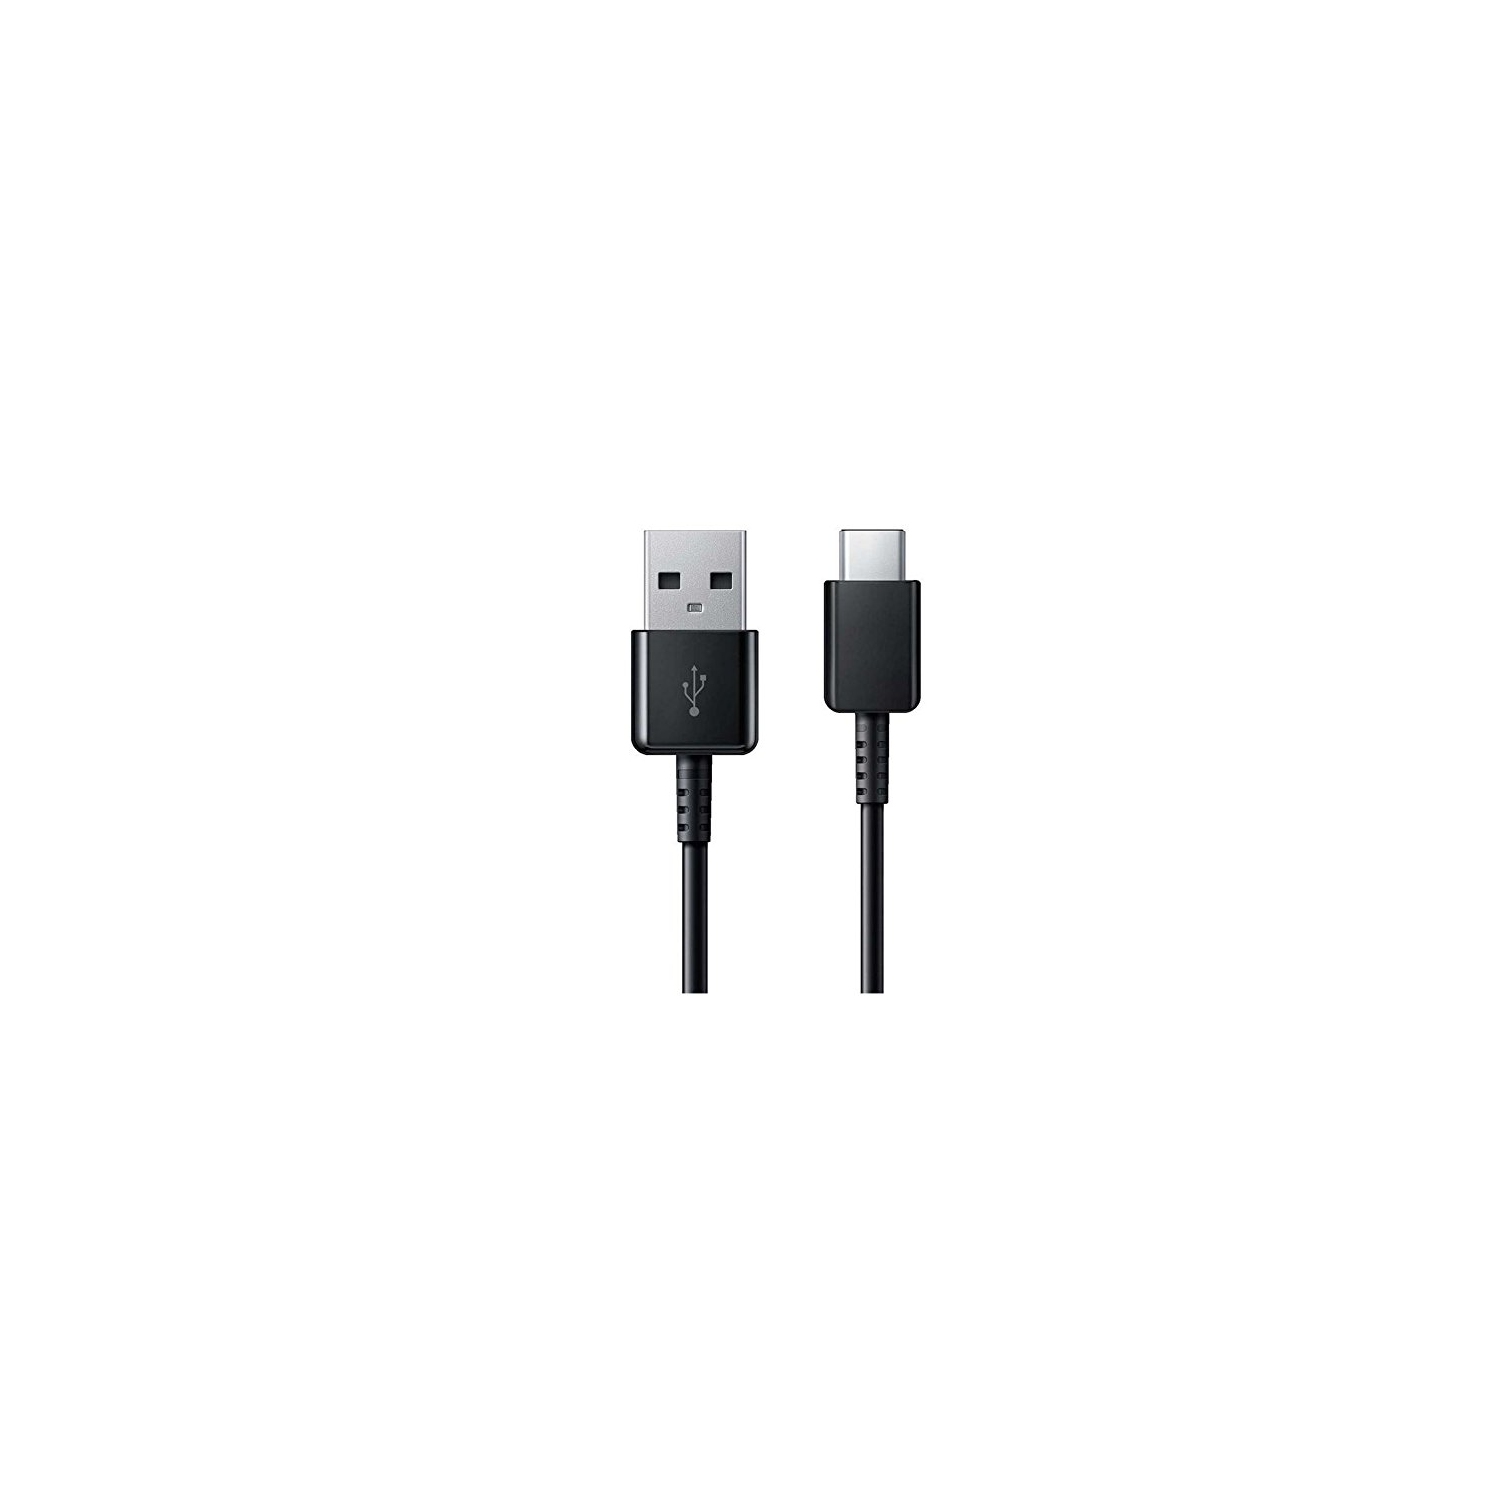 Samsung Fast USB Type C Data Charging Cable EP-DG950CBE for Samsung Galaxy A10e, A20, A50, Tab S3, Tab S4 , Tab S6 - Black